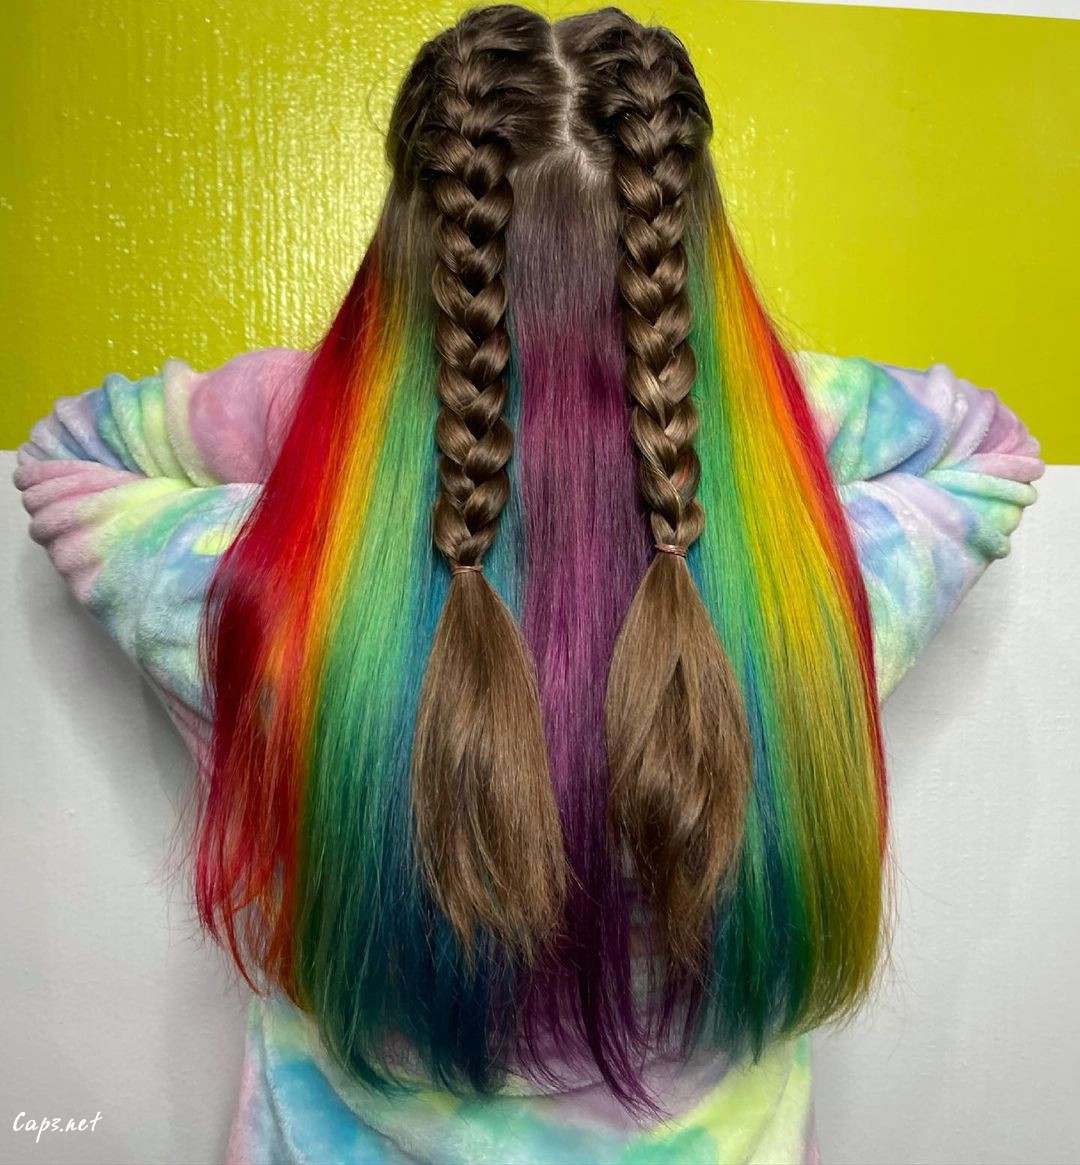 Rainbow color with some braids